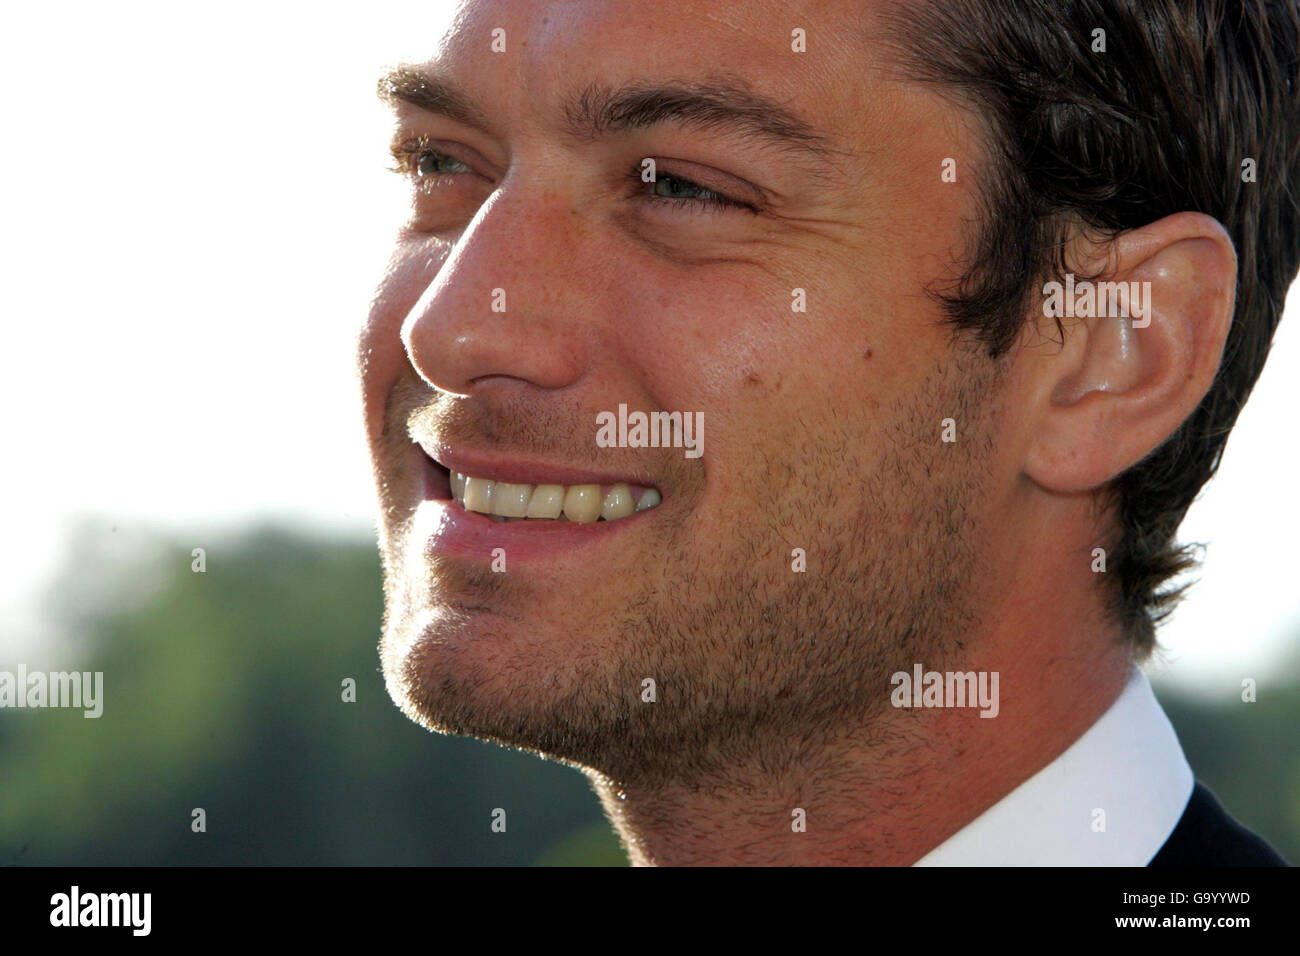 The Make a Wish Foundation annual ball. Film star Jude Law during the Make a Wish Foundation annual ball at Blenheim Palace, Oxfordshire. Stock Photo